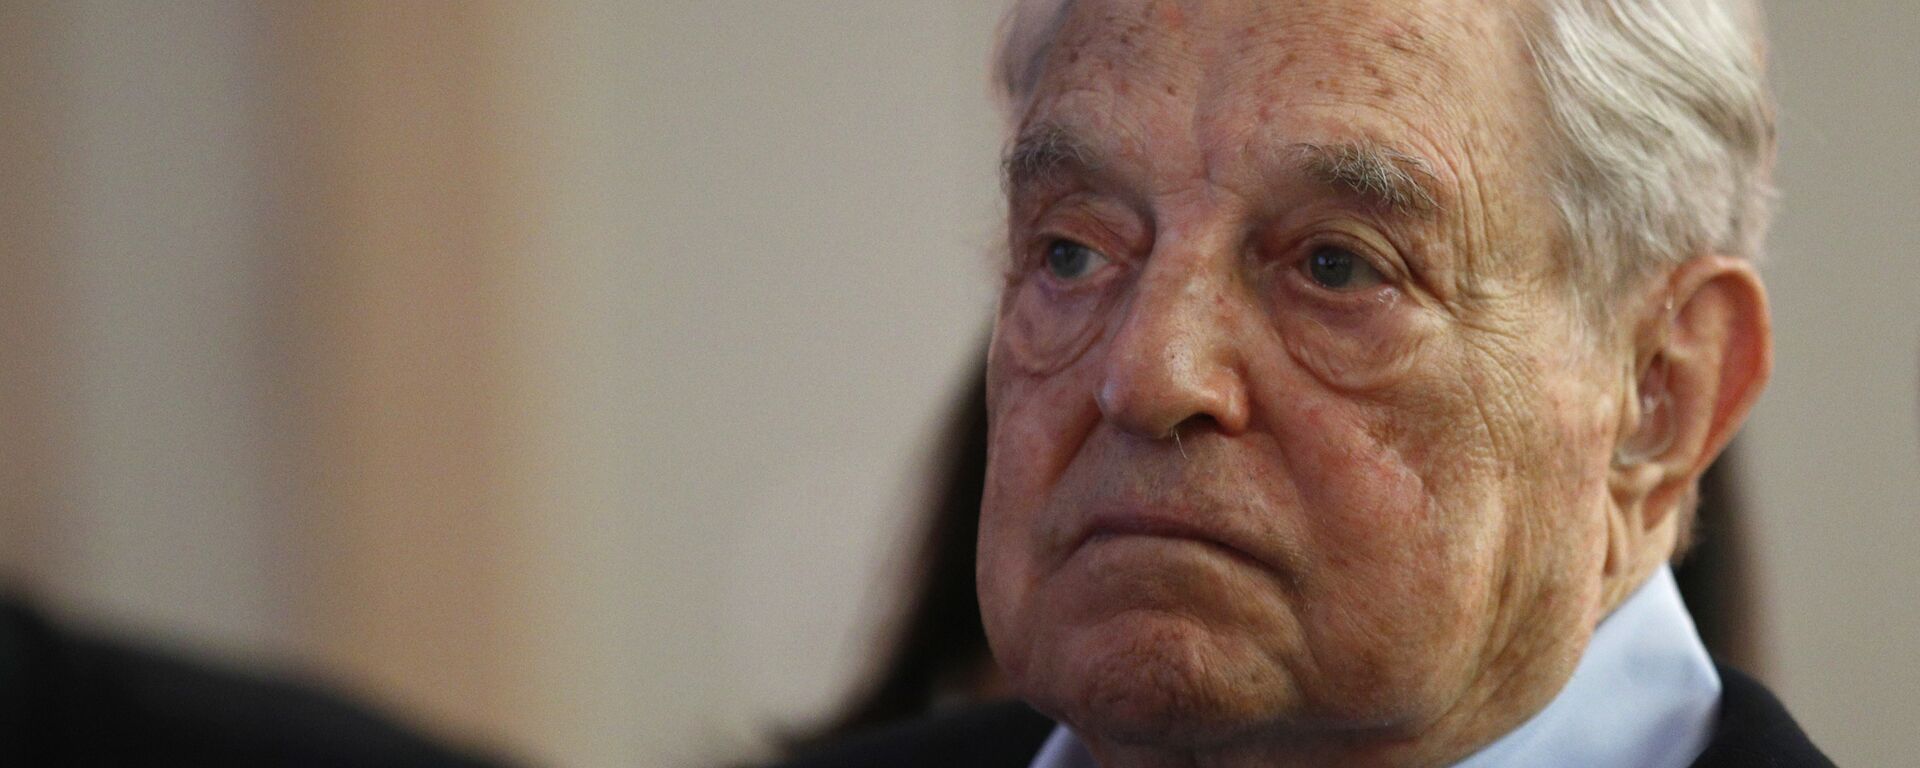 George Soros, Founder and Chairman of the Open Society Foundations listens to the conference after his speech entitled How to save the European Union as he attends the European Council On Foreign Relations Annual Council Meeting in Paris, Tuesday, May 29, 2018 - Sputnik International, 1920, 30.04.2021